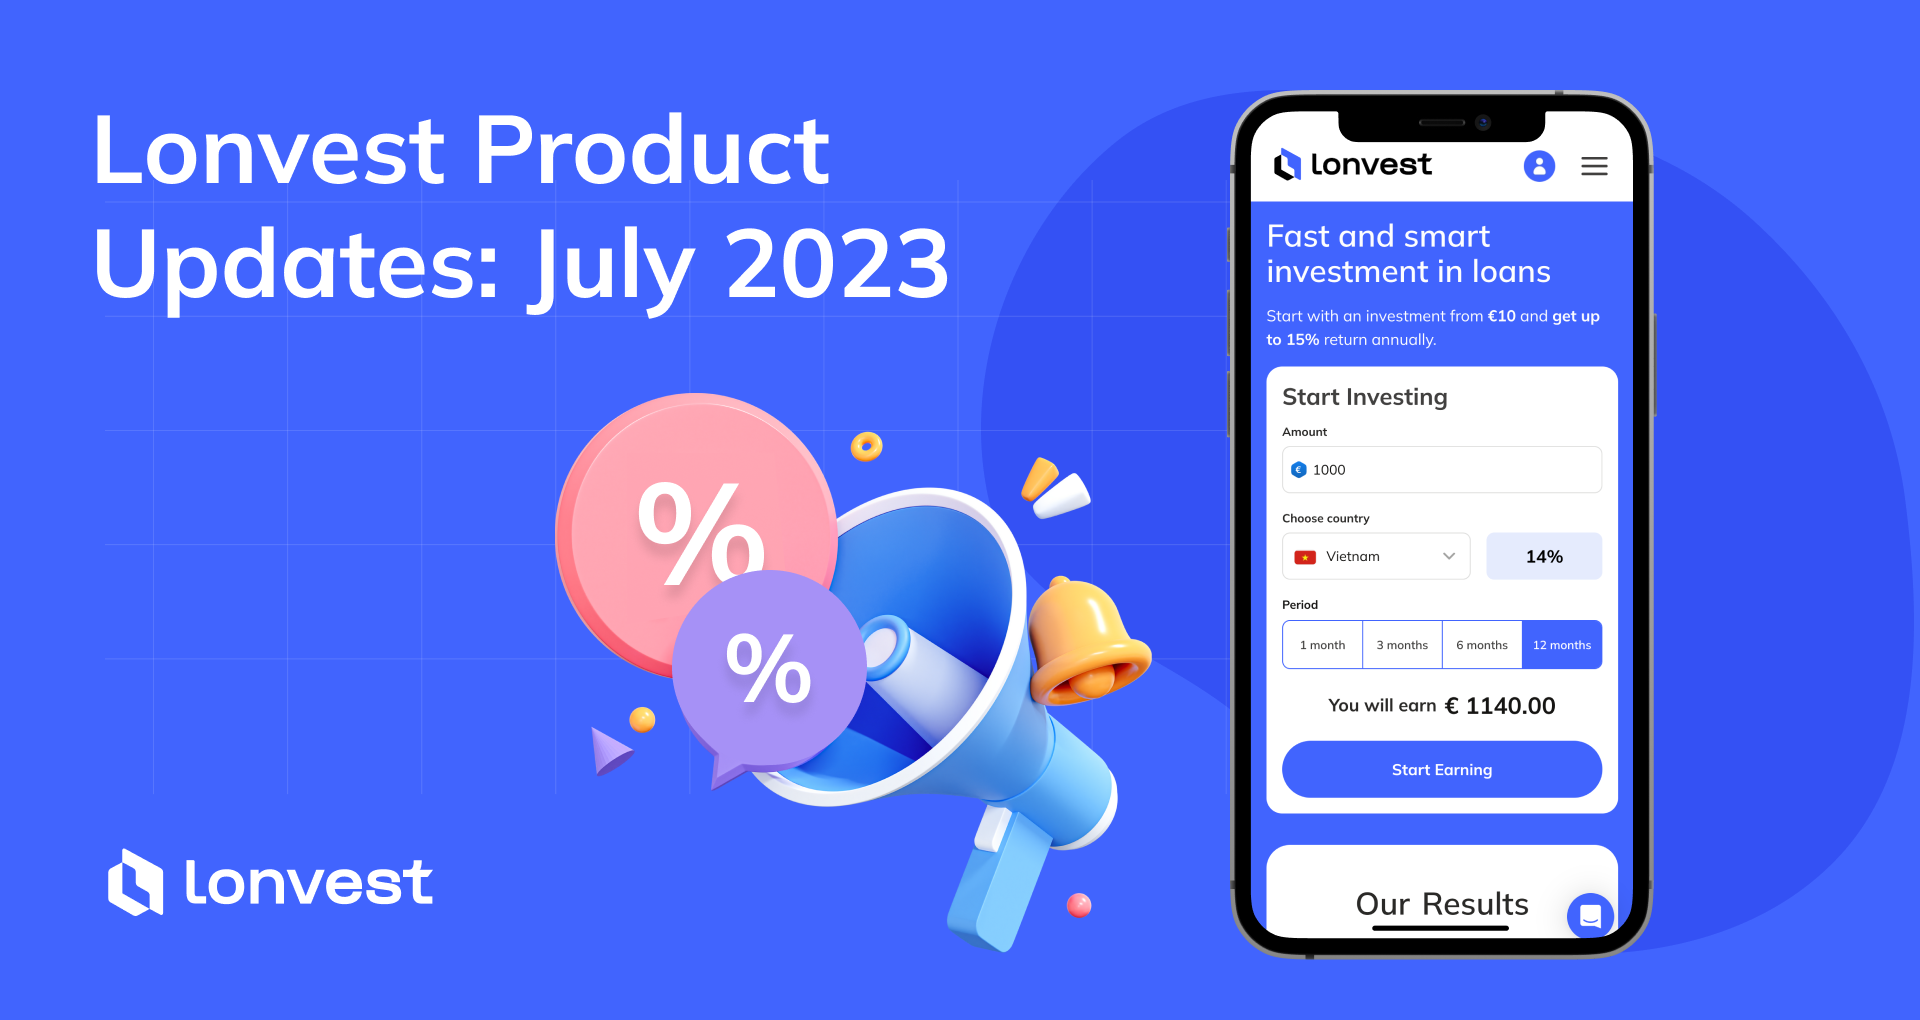 Lonvest Product Updates: July 2023